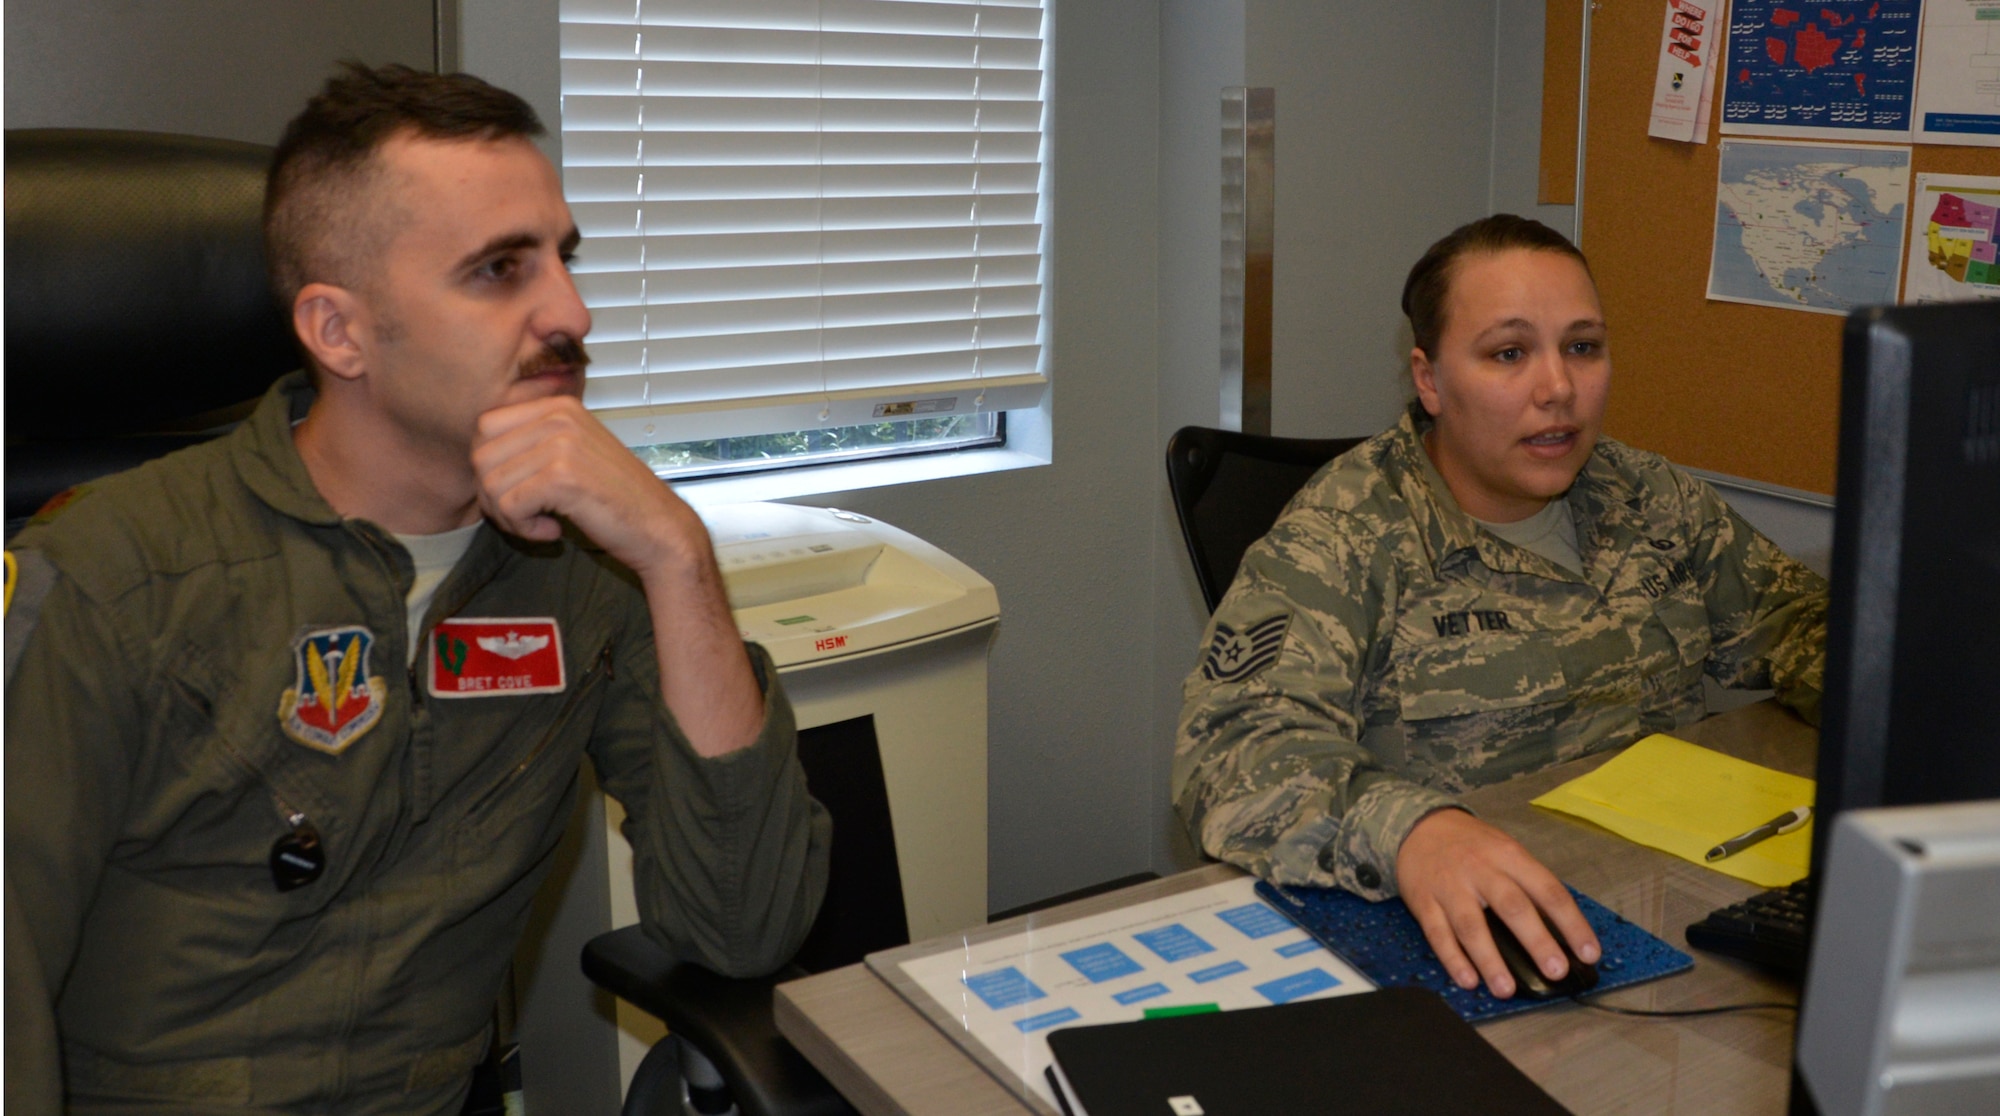 Maj. Bret Cove, Air Force Rescue Coordination Center Assistant Director of Operations, listens as Tech. Sgt. Brittany Vetter, AFRCC Operations Flight NCO in Charge, reviews the day’s notifications during a shift change in the AFRCC operations room. (Photo by Mary McHale)